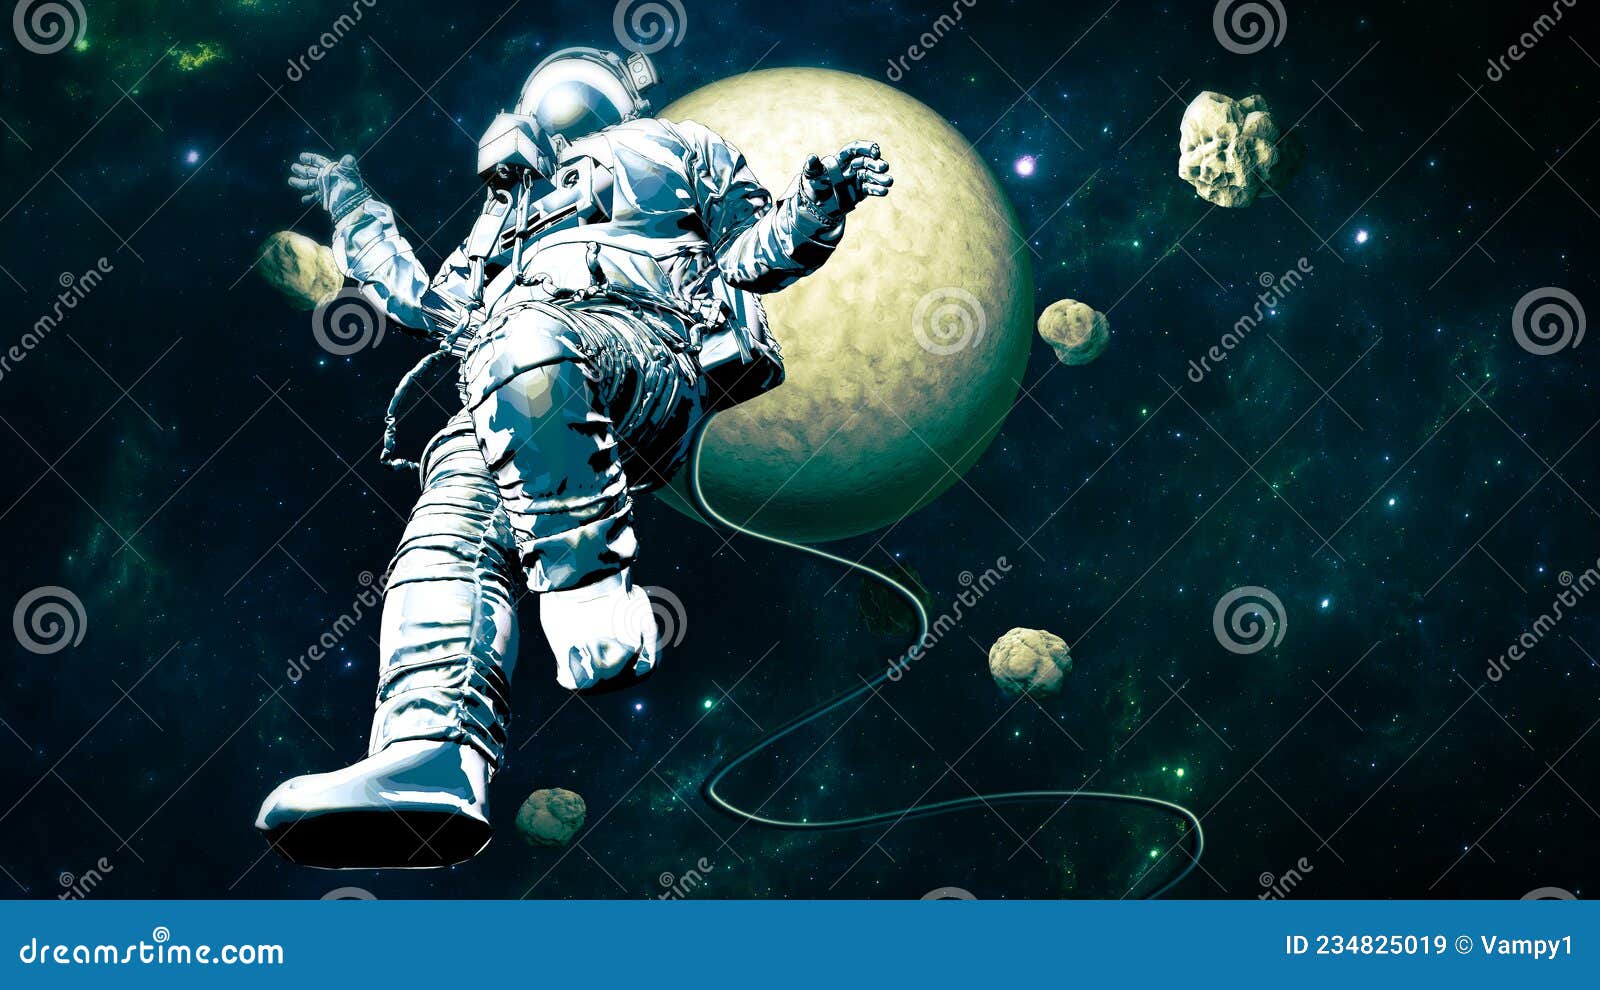 astronaut floating in space. new worlds and unexplored galaxies. asteroids and planet